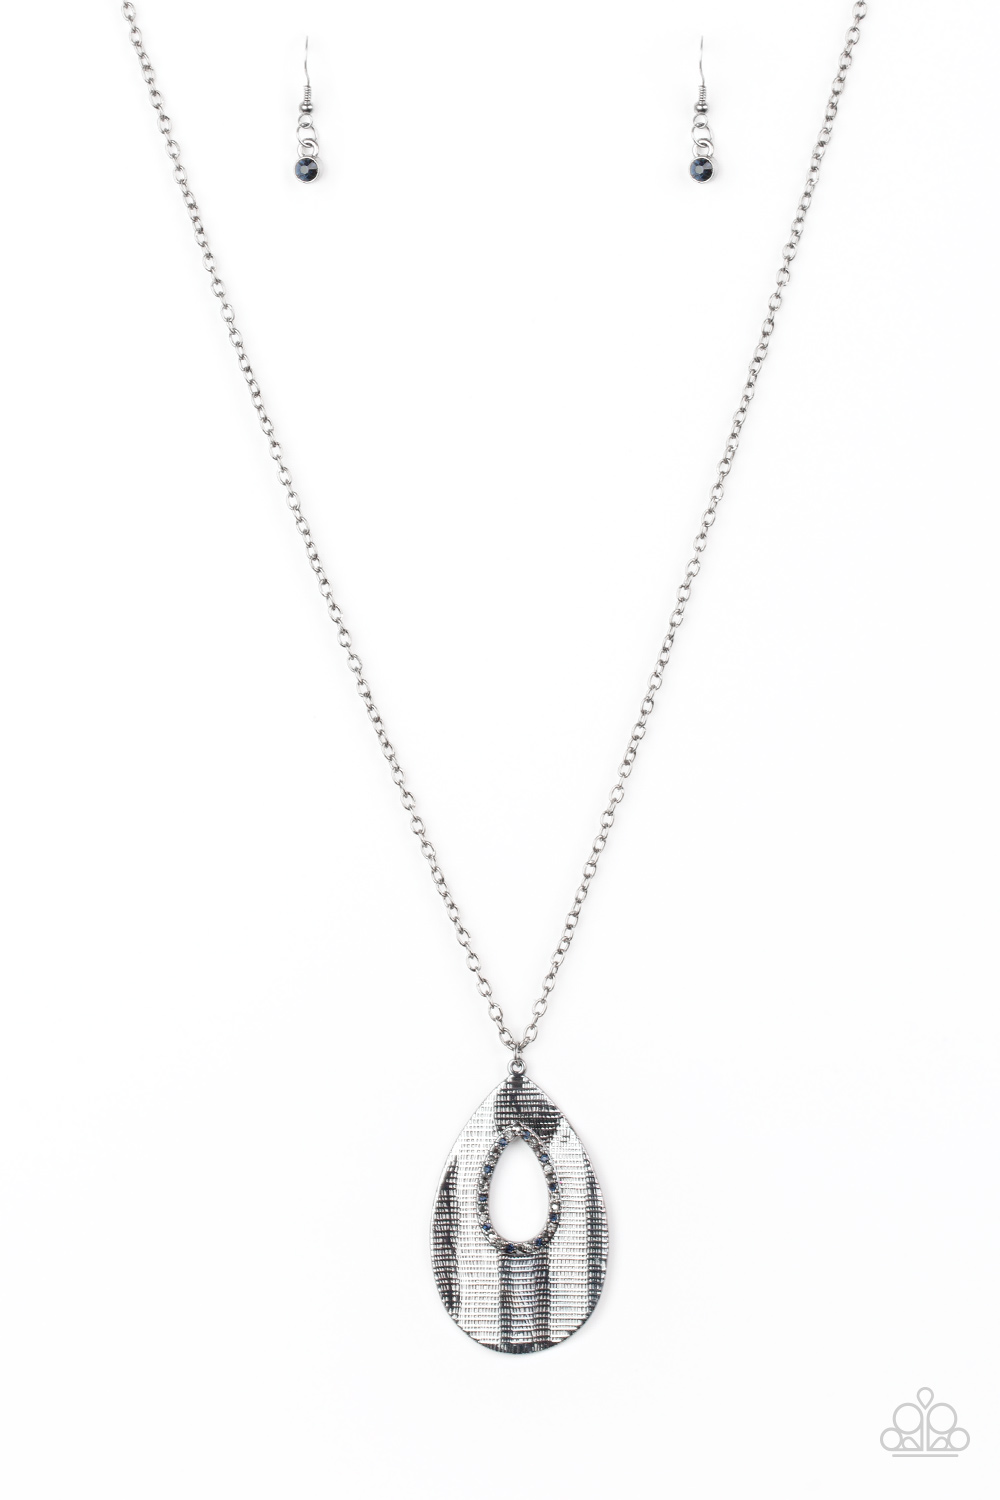 Necklace - Stop, TEARDROP, and Roll - Multi